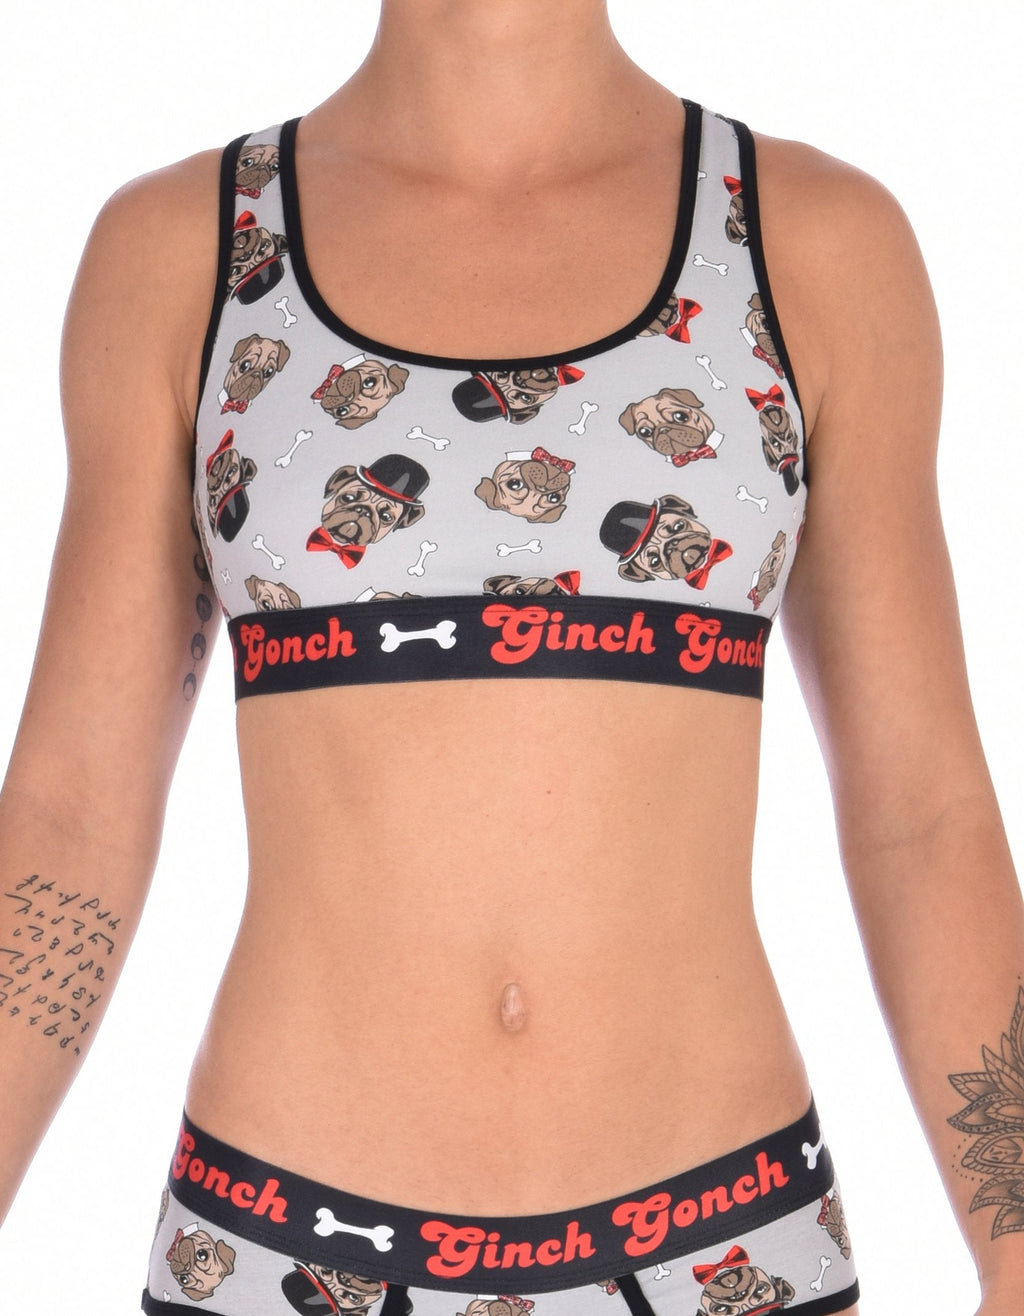 GG Ginch Gonch Pug Life sports bra - women's Underwear grey background with pugs with top hats and bow ties and bones. Black trim with black printed band front. 